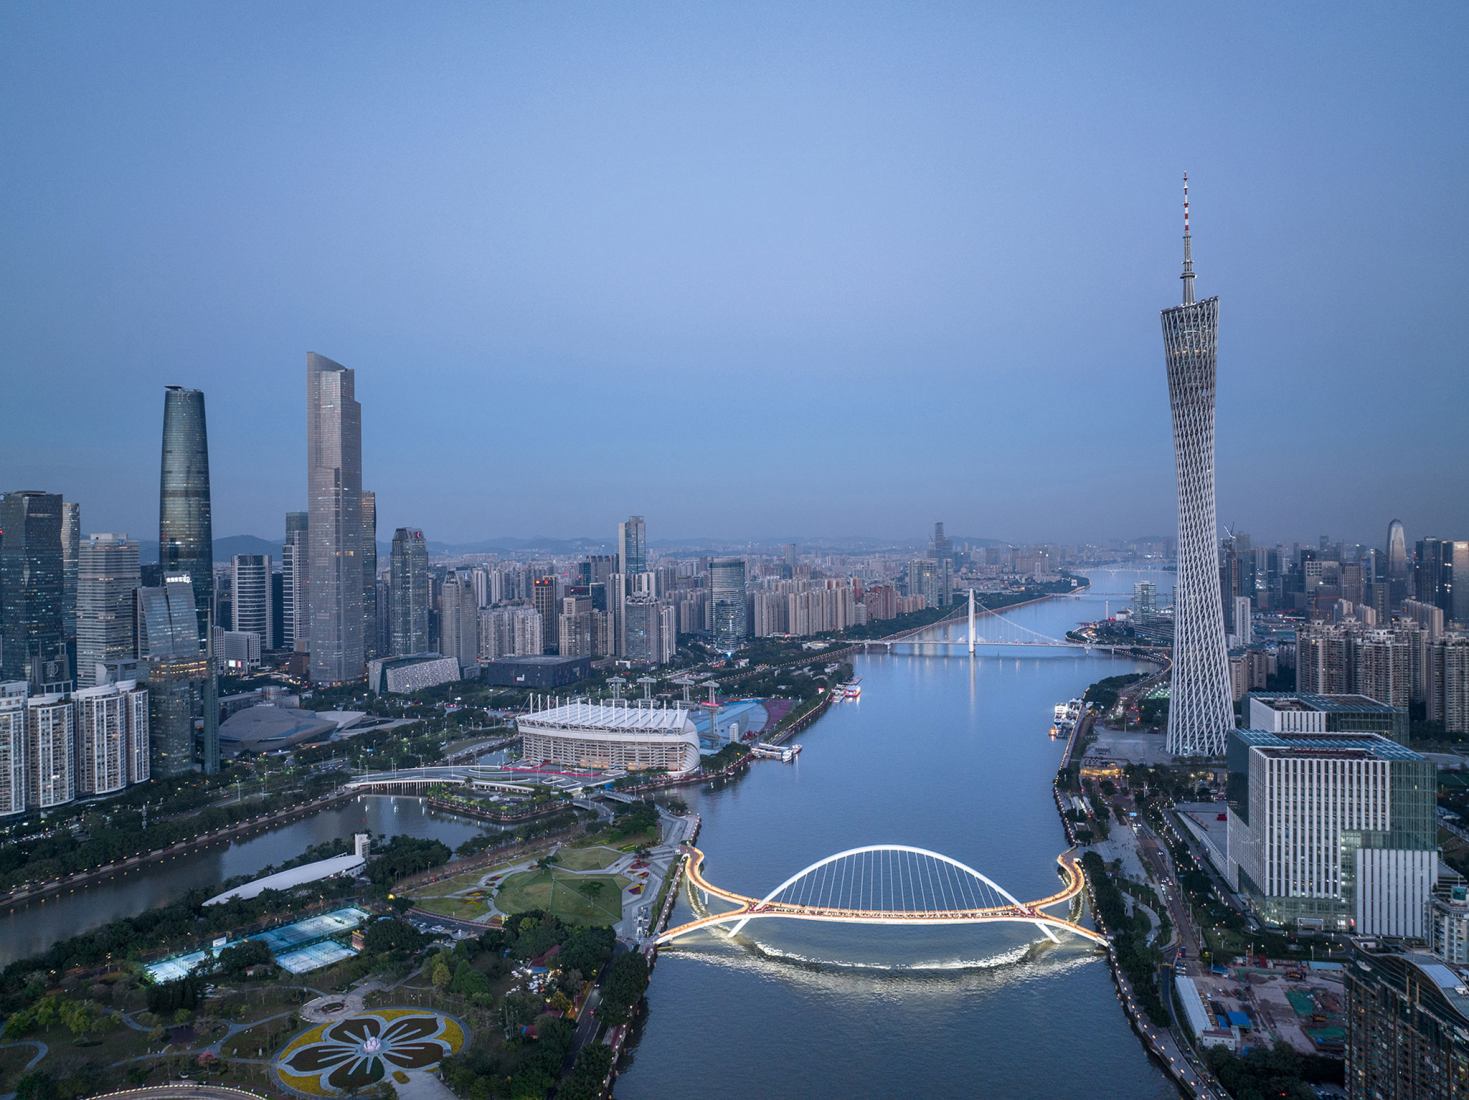 Guangzhou Haixin Bridge by Architectural Design and Research Institute of SCUT Co., Ltd. Photograph by Zhan Changheng.